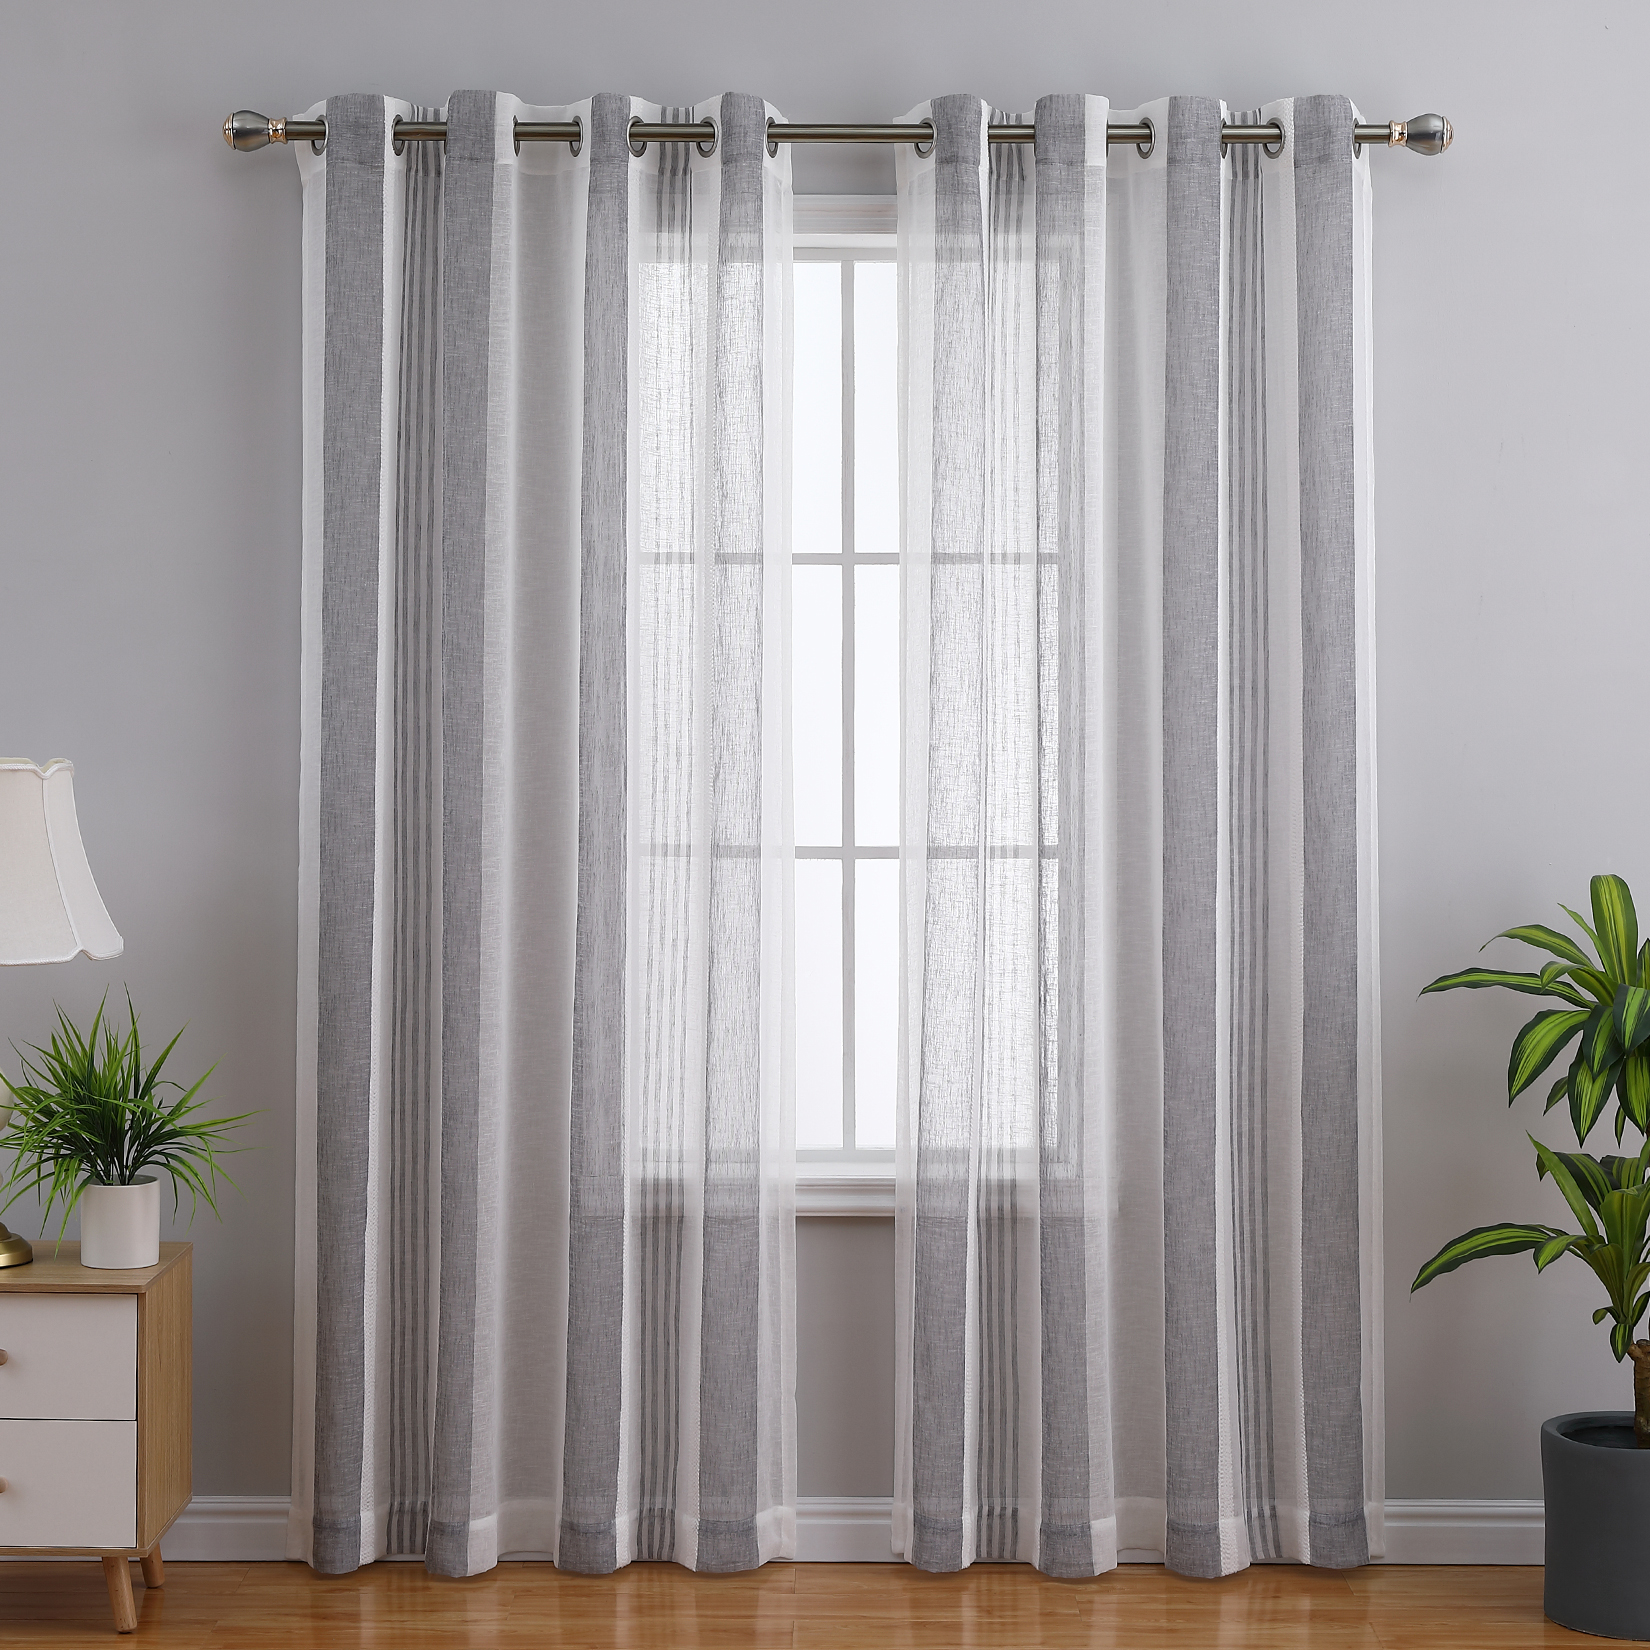 US CAROMIO 52 inch W Sheer Curtains for Living Room Bedroom Dark Grey 52 inch W x63 inch L